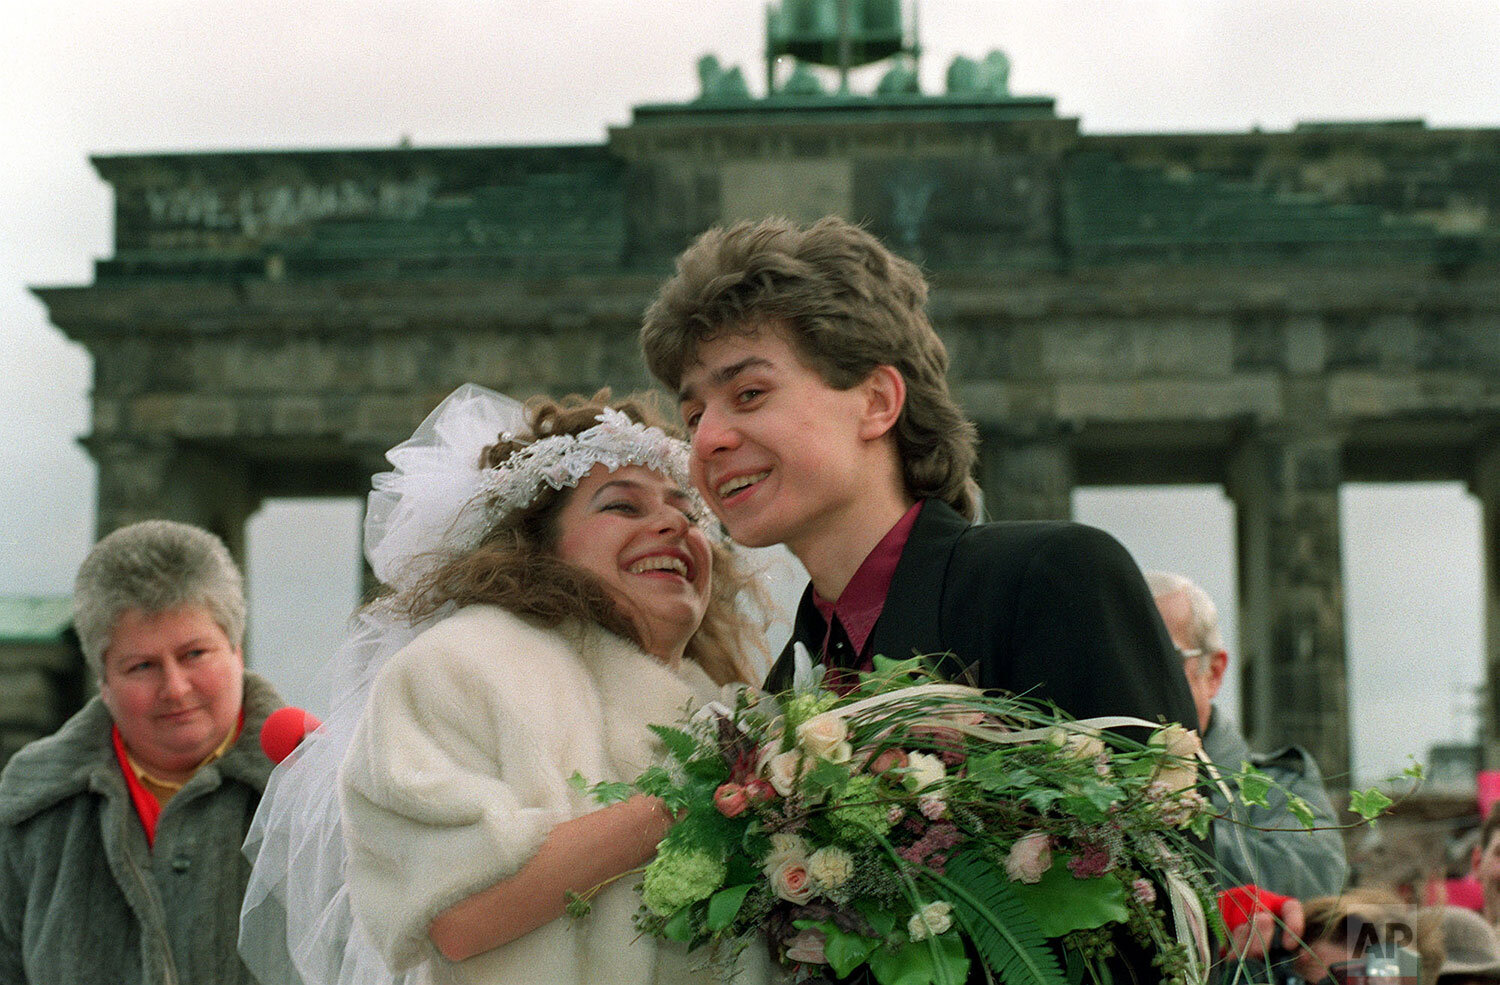  Barbara Hartung (21) from East Berlin and Oliver Matalla (21) from West Berlin smile happily after their wedding ceremony held in front of Brandenburg Gate, West Berlin, on Wednesday, February 14, 1990. (AP Photo/Rainer Klostermeier) 